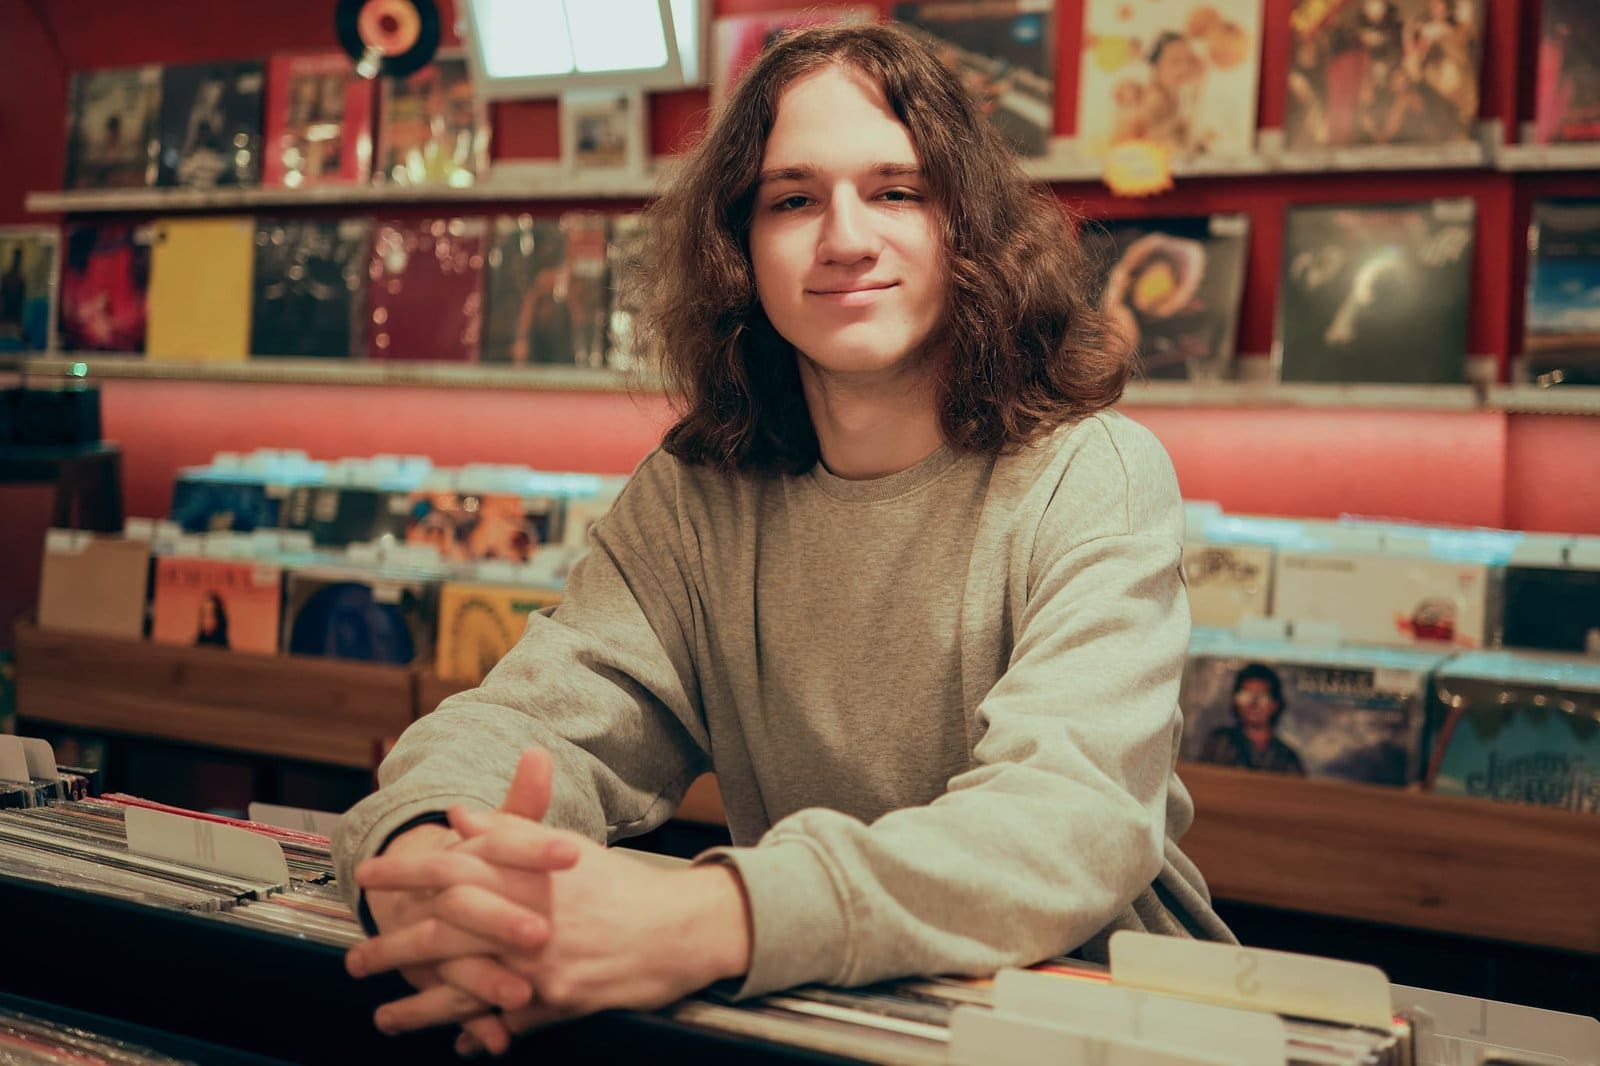 High school senior smiling in record store.